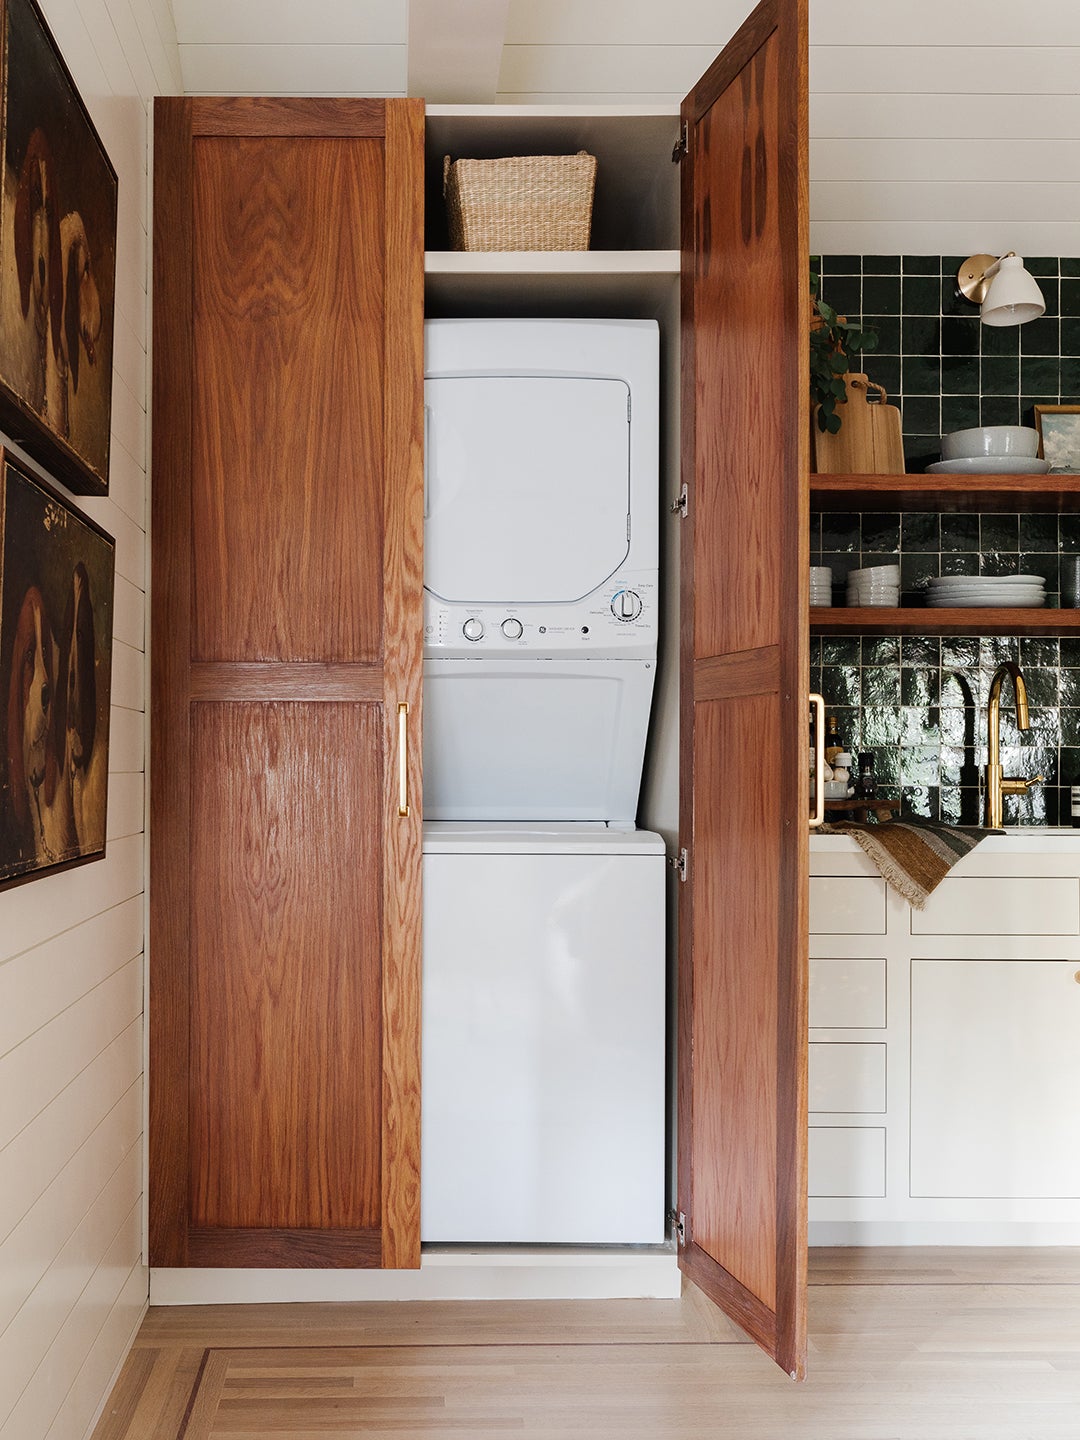 Wood Pantry Doors Covering Washer and Dryer